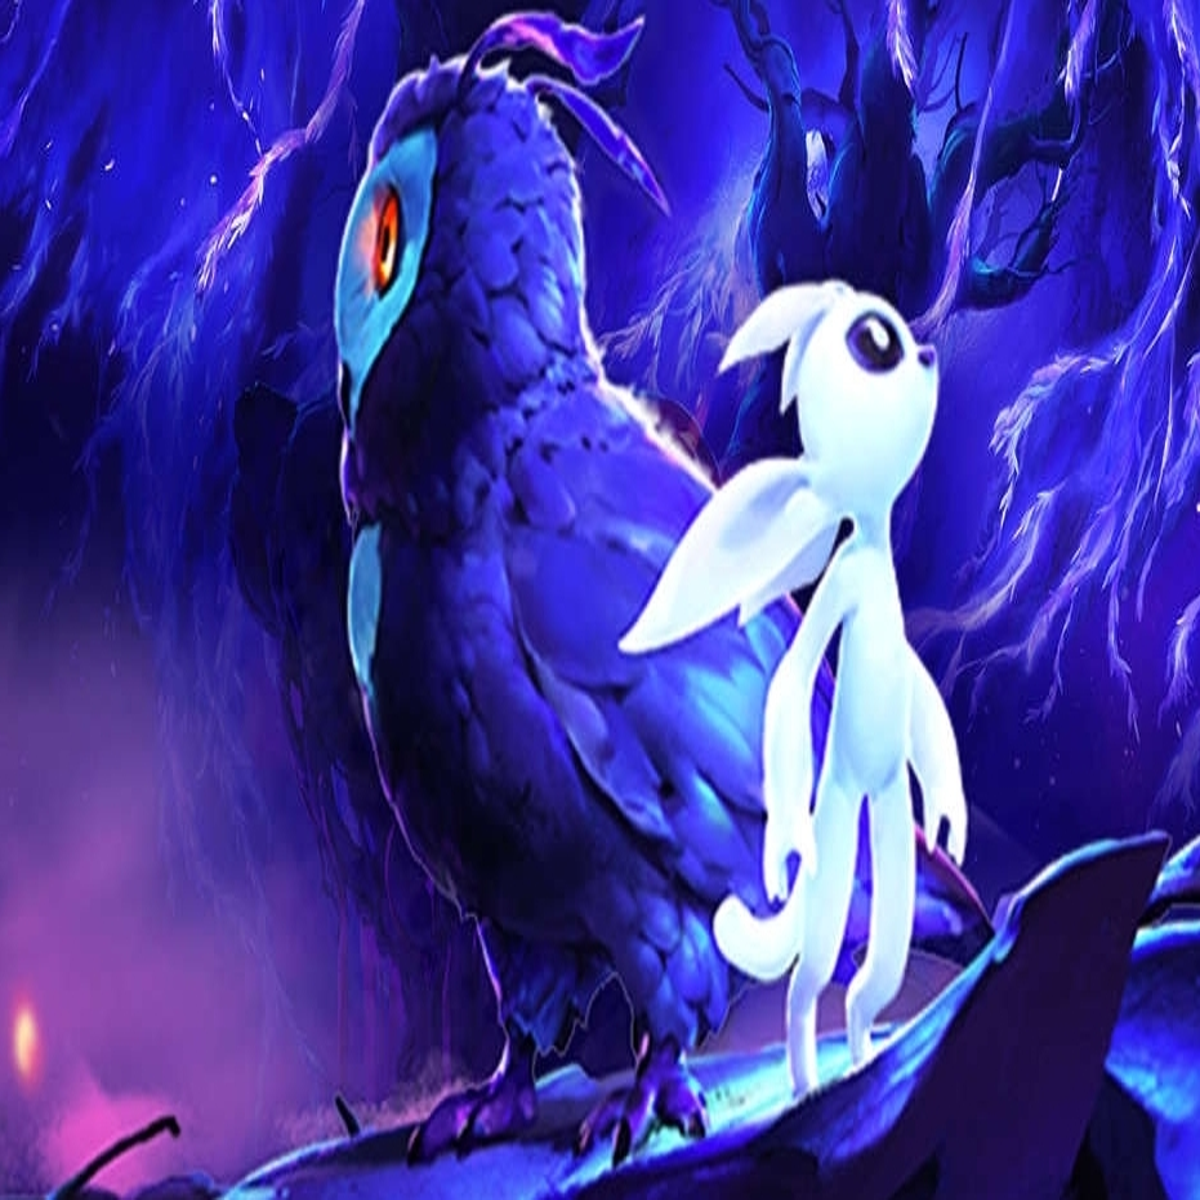 Standalone Switch Physical Editions For Both Ori Games Now Up For